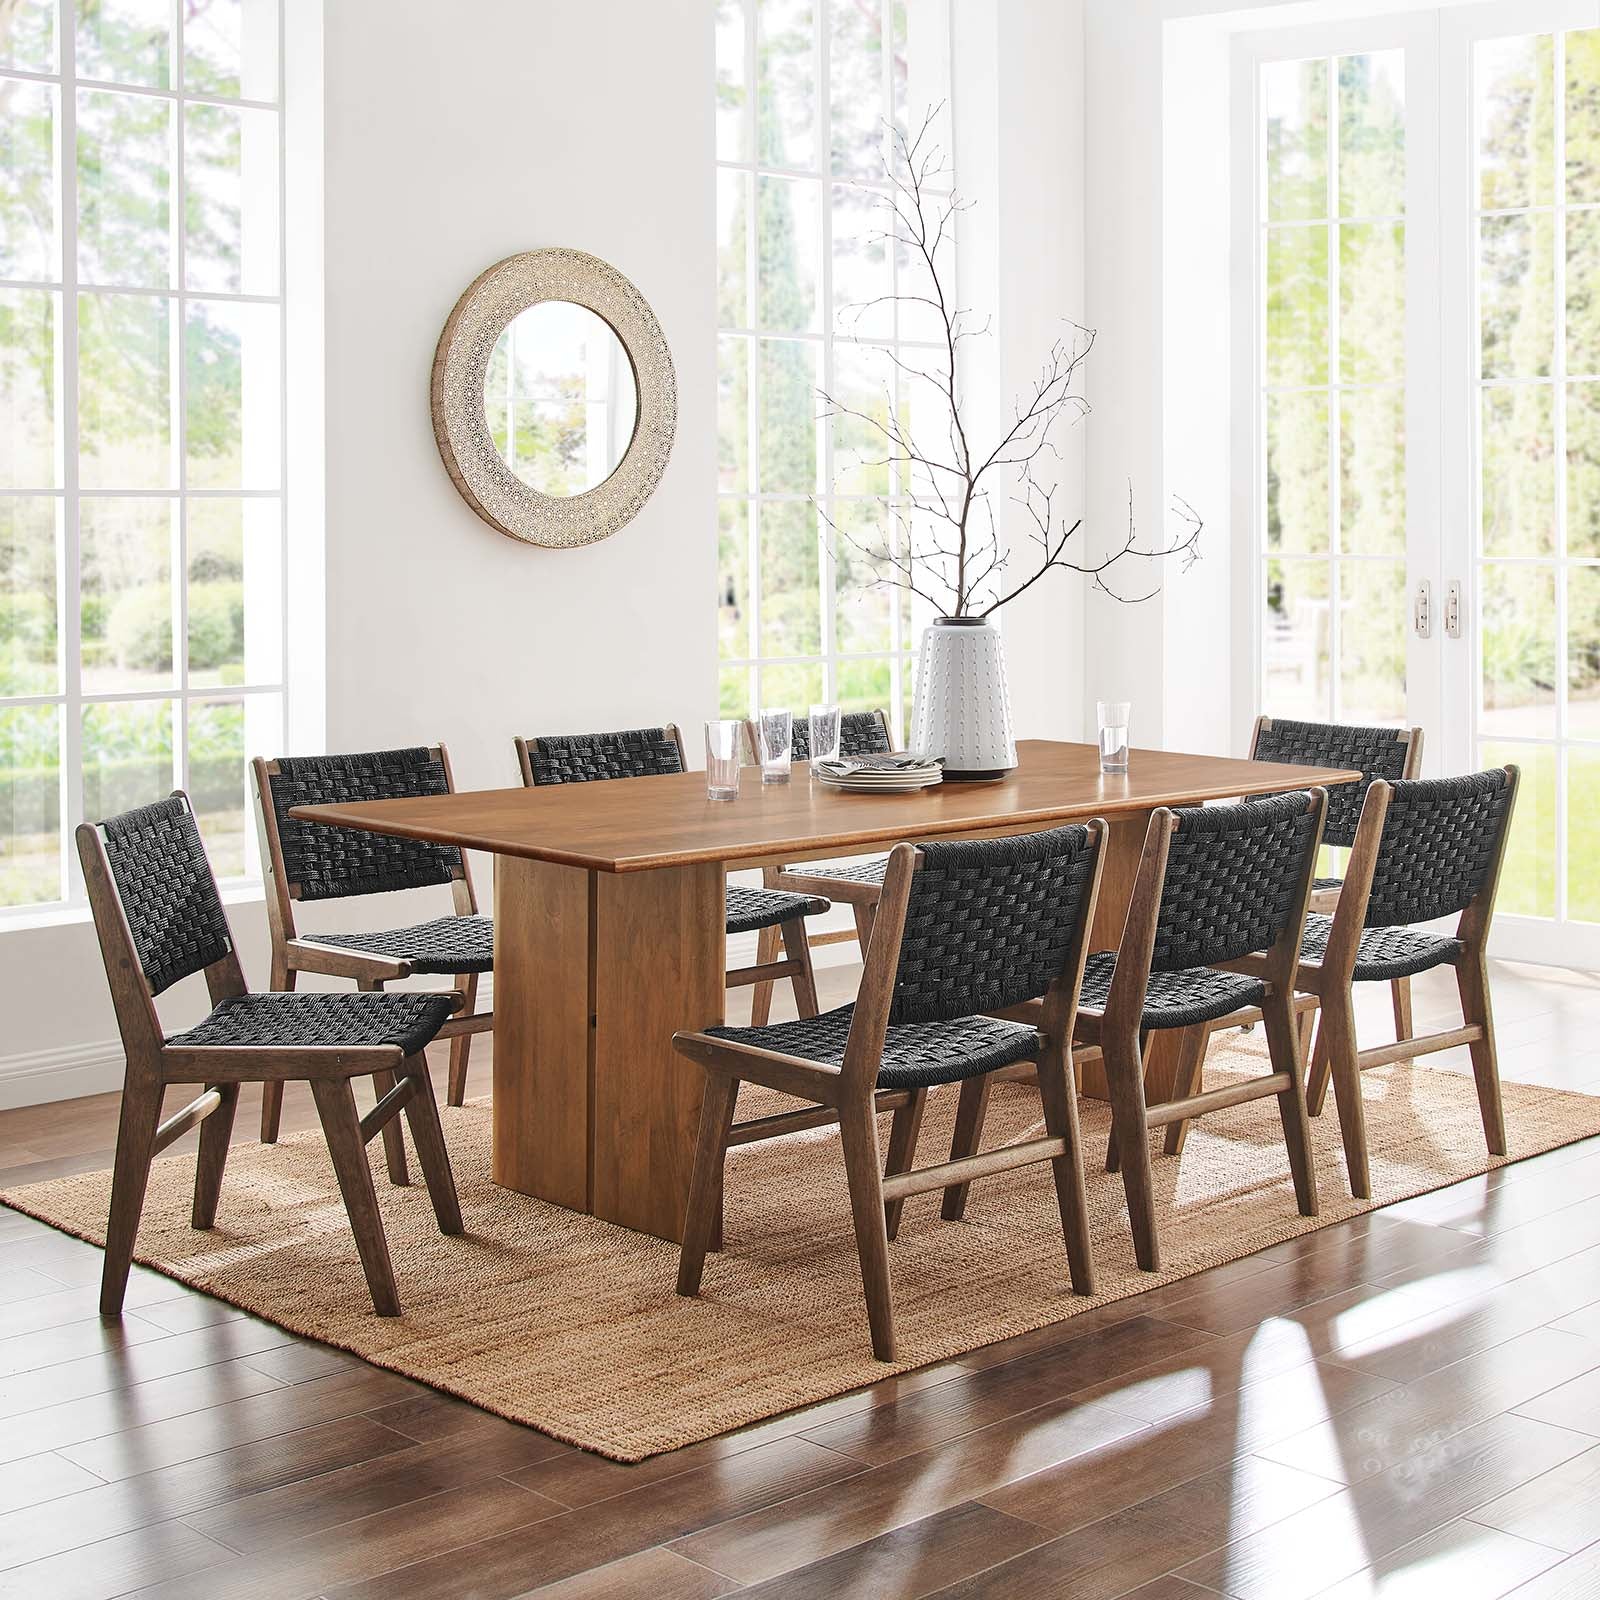 Amistad 86" Wood Dining Table - East Shore Modern Home Furnishings